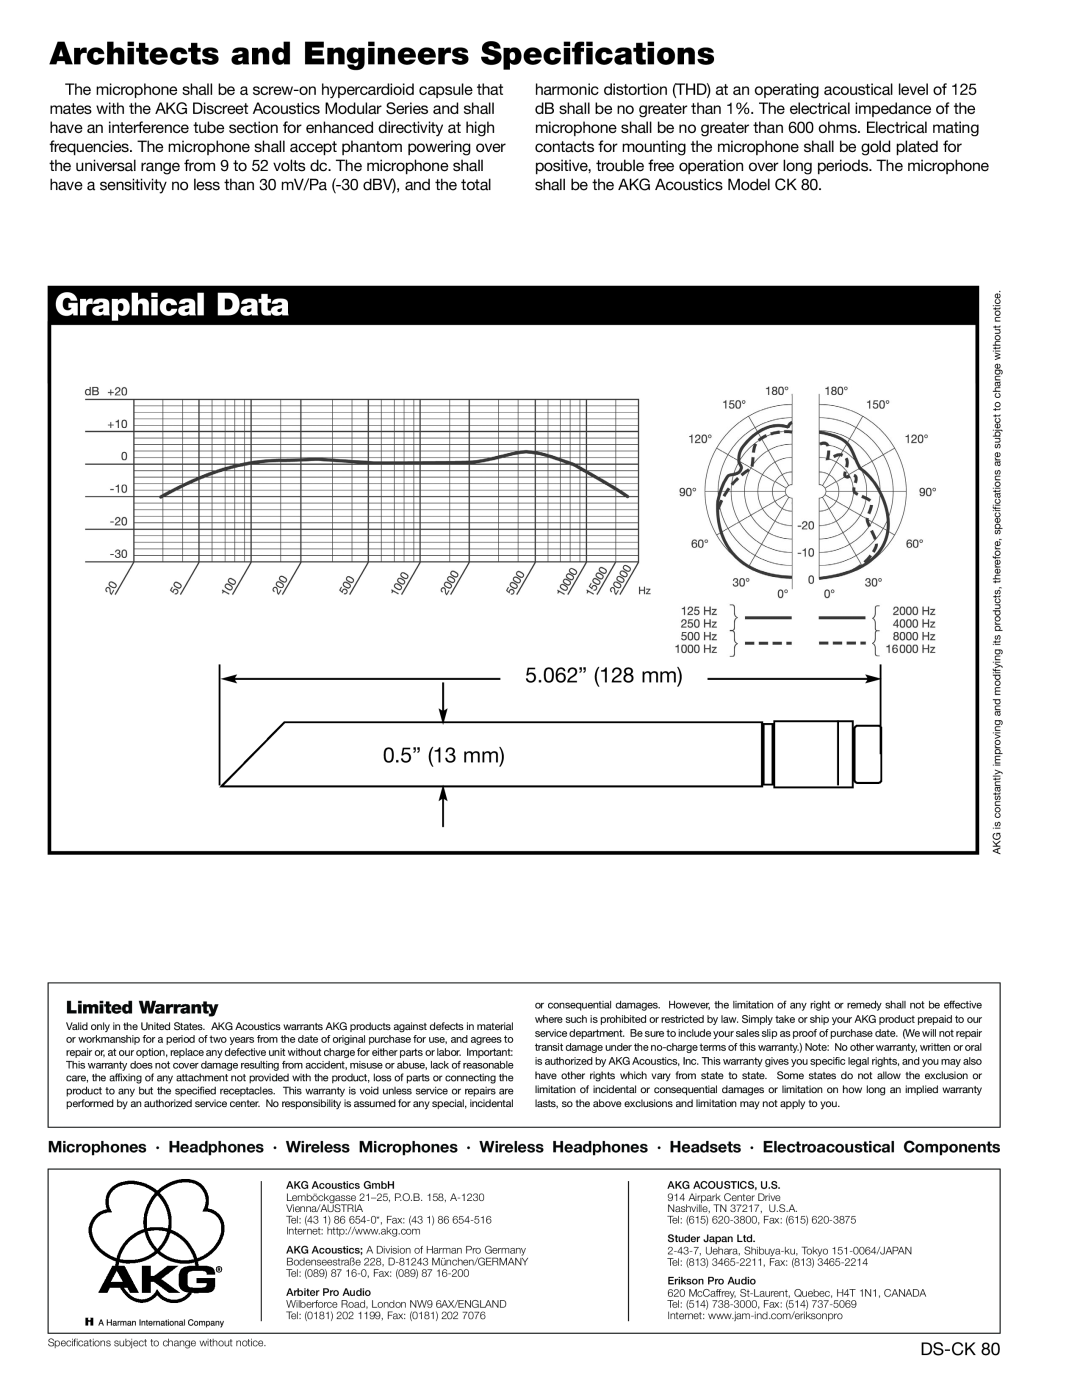 AKG Acoustics CK80 Architects and Engineers Specifications, Graphical Data, 5.062” 128 mm 0.5” 13 mm, Limited Warranty 